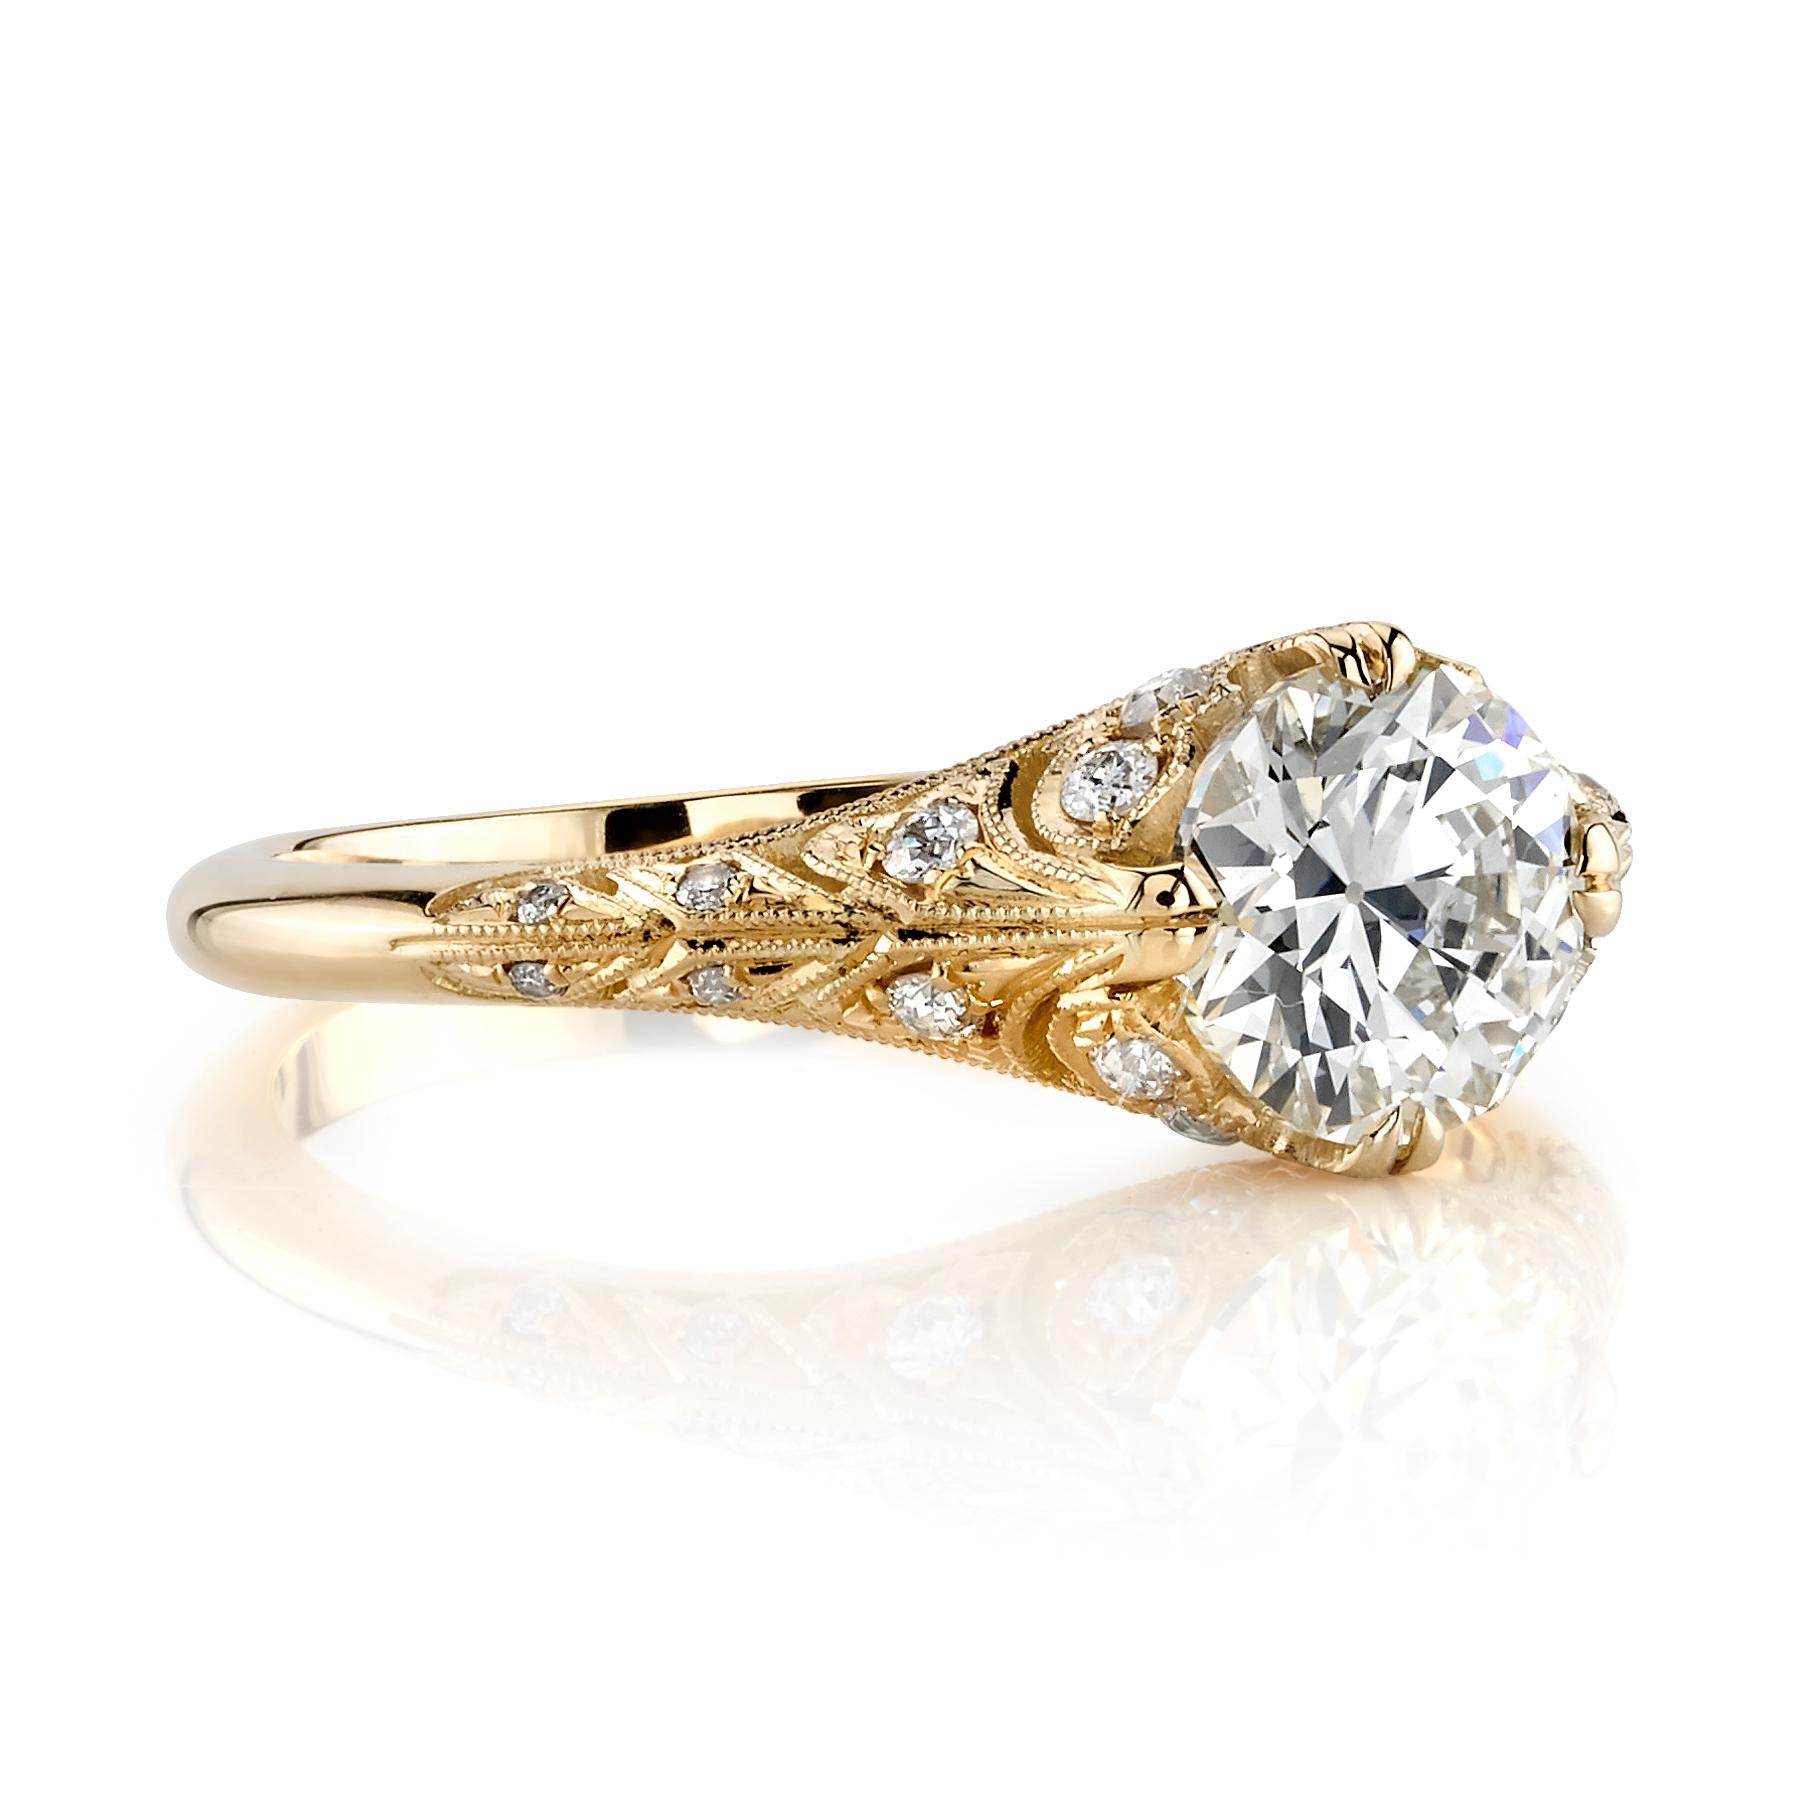 1.01ct M/VS2 GIA certified old European cut diamond with 0.16ctw diamond accents set in a handcrafted 18K yellow gold mounting. Ring is currently a size 6 and can be sized to fit